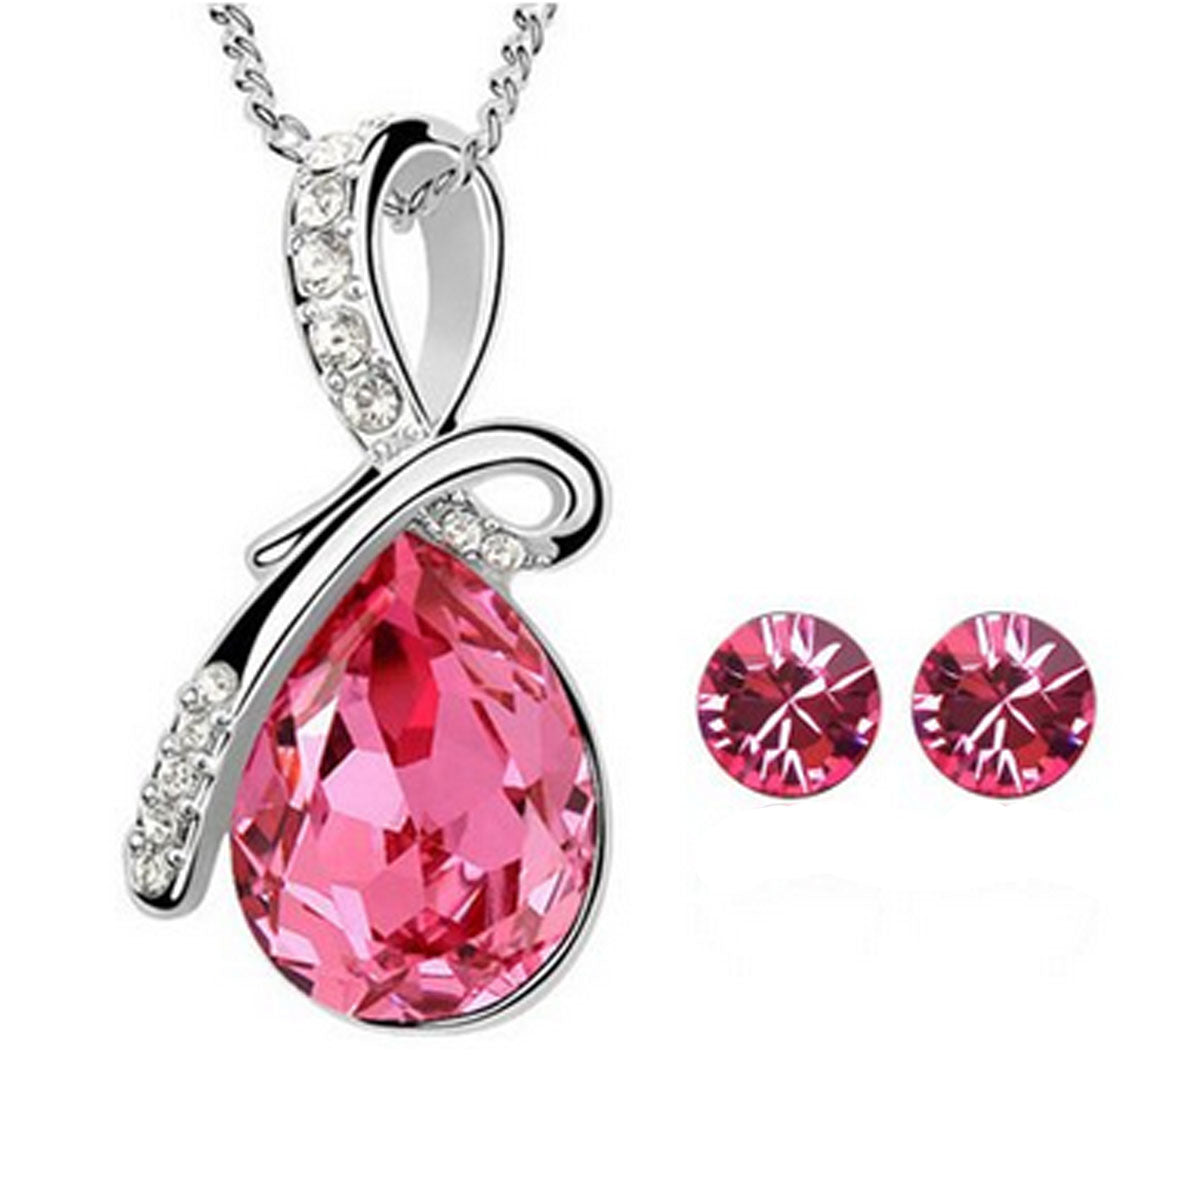 Wrapables Eternal Love Crystal Teardrop Pendant Necklace and Stud Earrings Jewelry Set